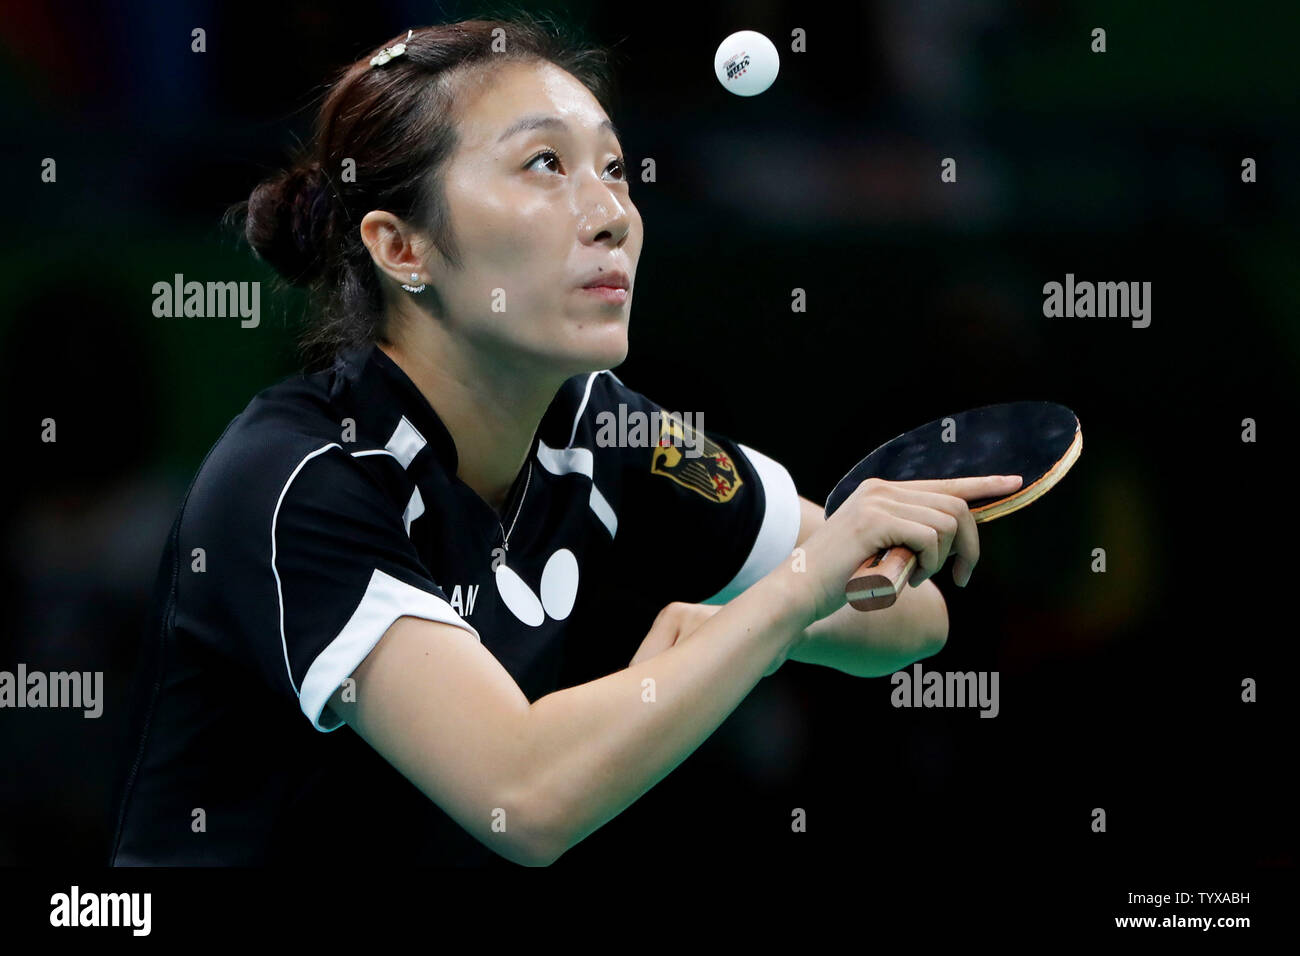 GermanyÕs Ying Han lines up a serve in the Women's Team Table Tennis gold medal match against ChinaÕs Xiaoxia Li in Riocentro Pavilion 3 at the 2016 Rio Summer Olympics in Rio de Janeiro, Brazil, on August 16, 2016.   Photo by Matthew Healey/UPI Stock Photo